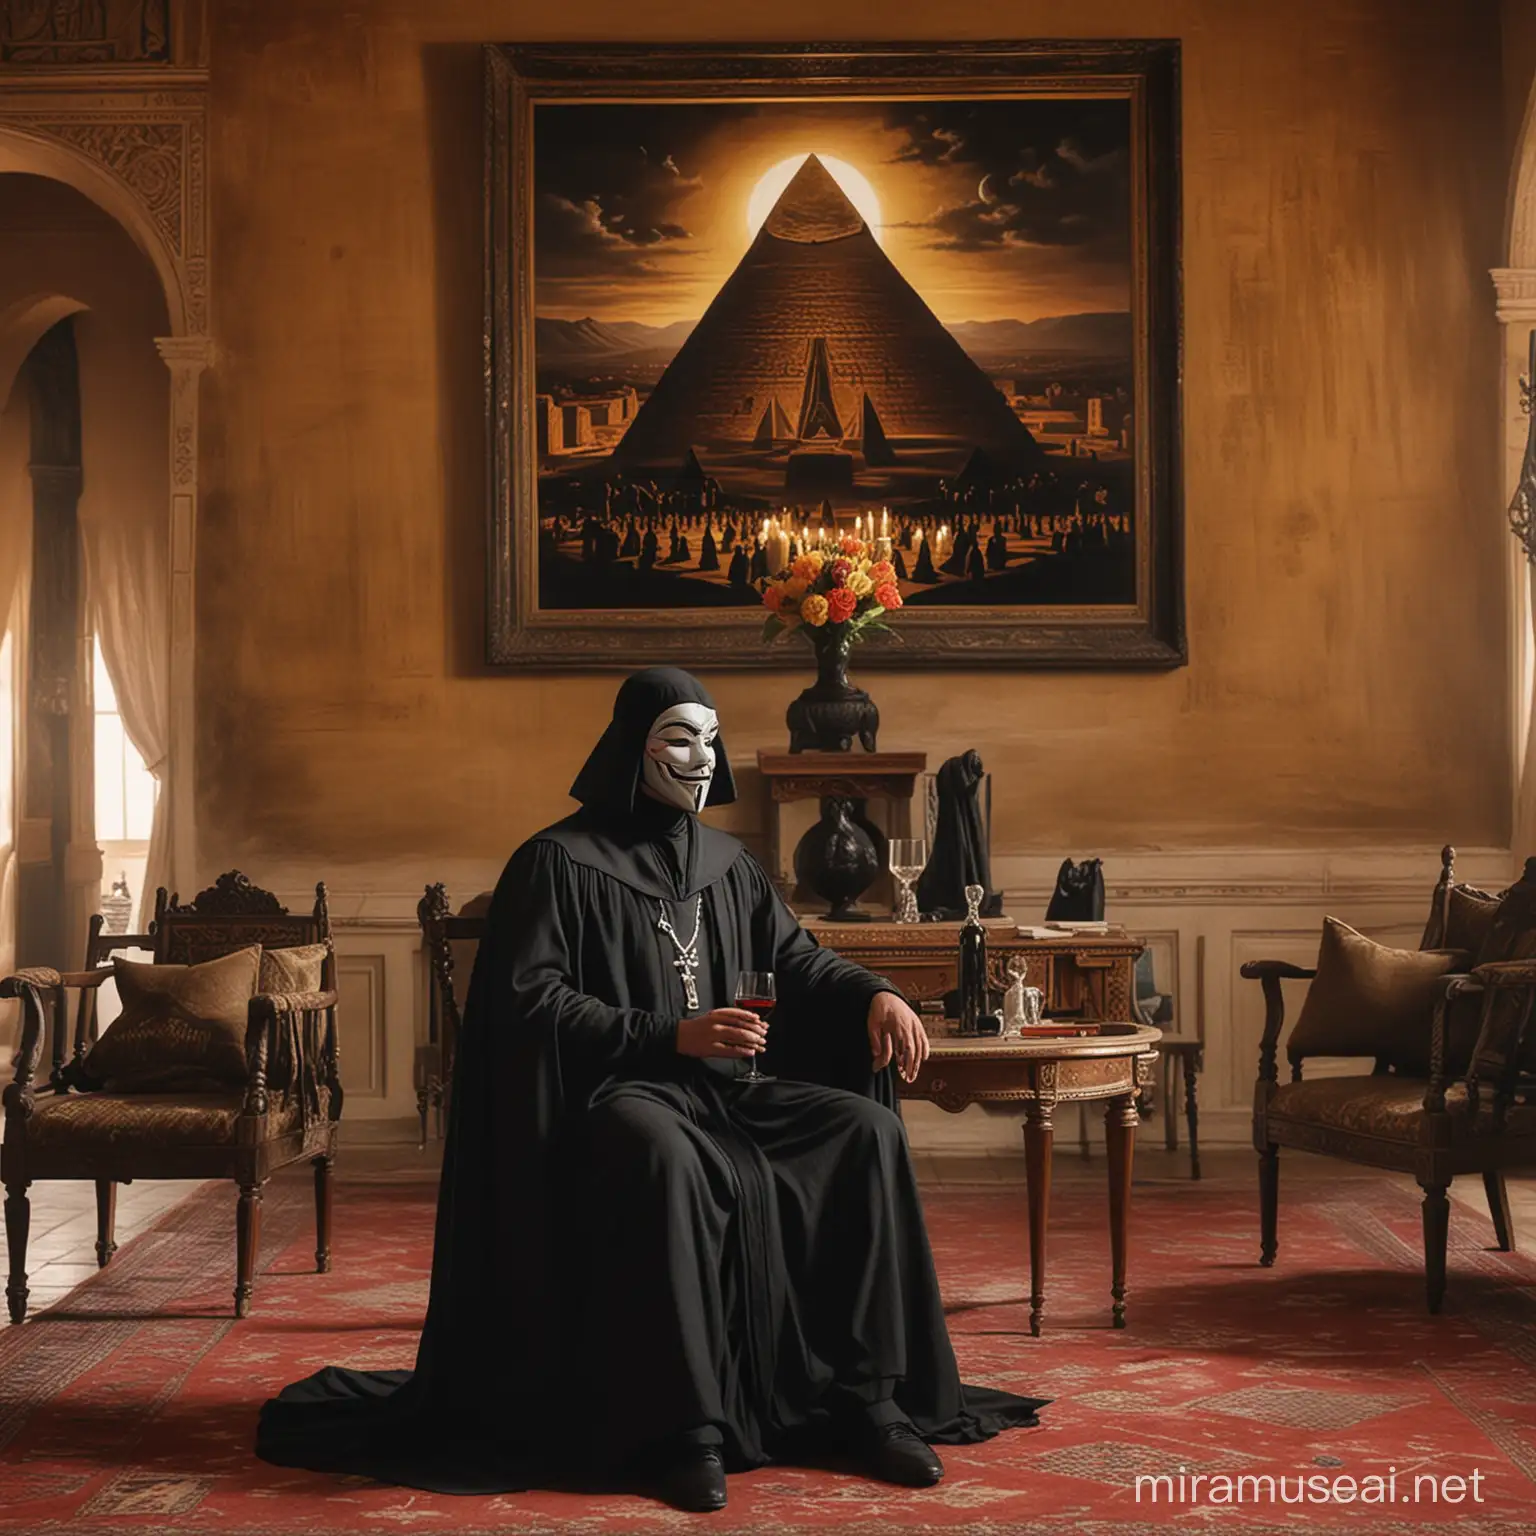 V For Vendetta sitting in the palace room, wearing a black cloak, drinking wine and relaxing with a painting of the pyramids behind him in the year 2024 